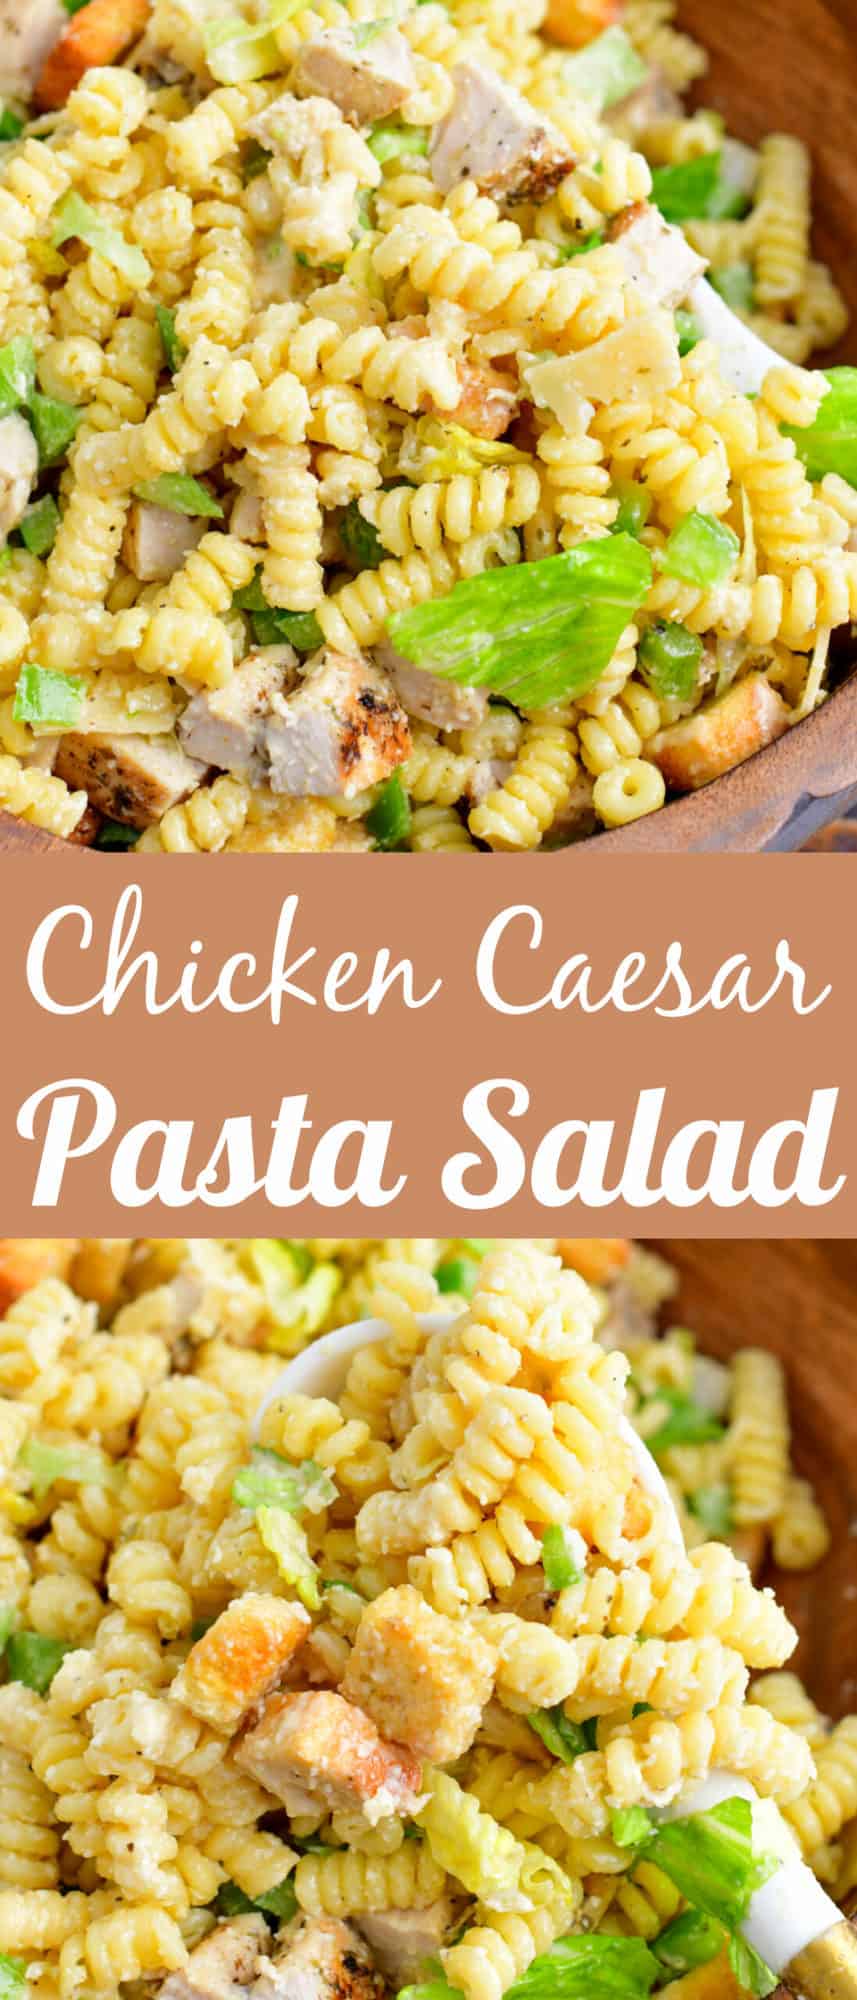 title collage image of close up on pasta salad and scooping pasta with title in the middle